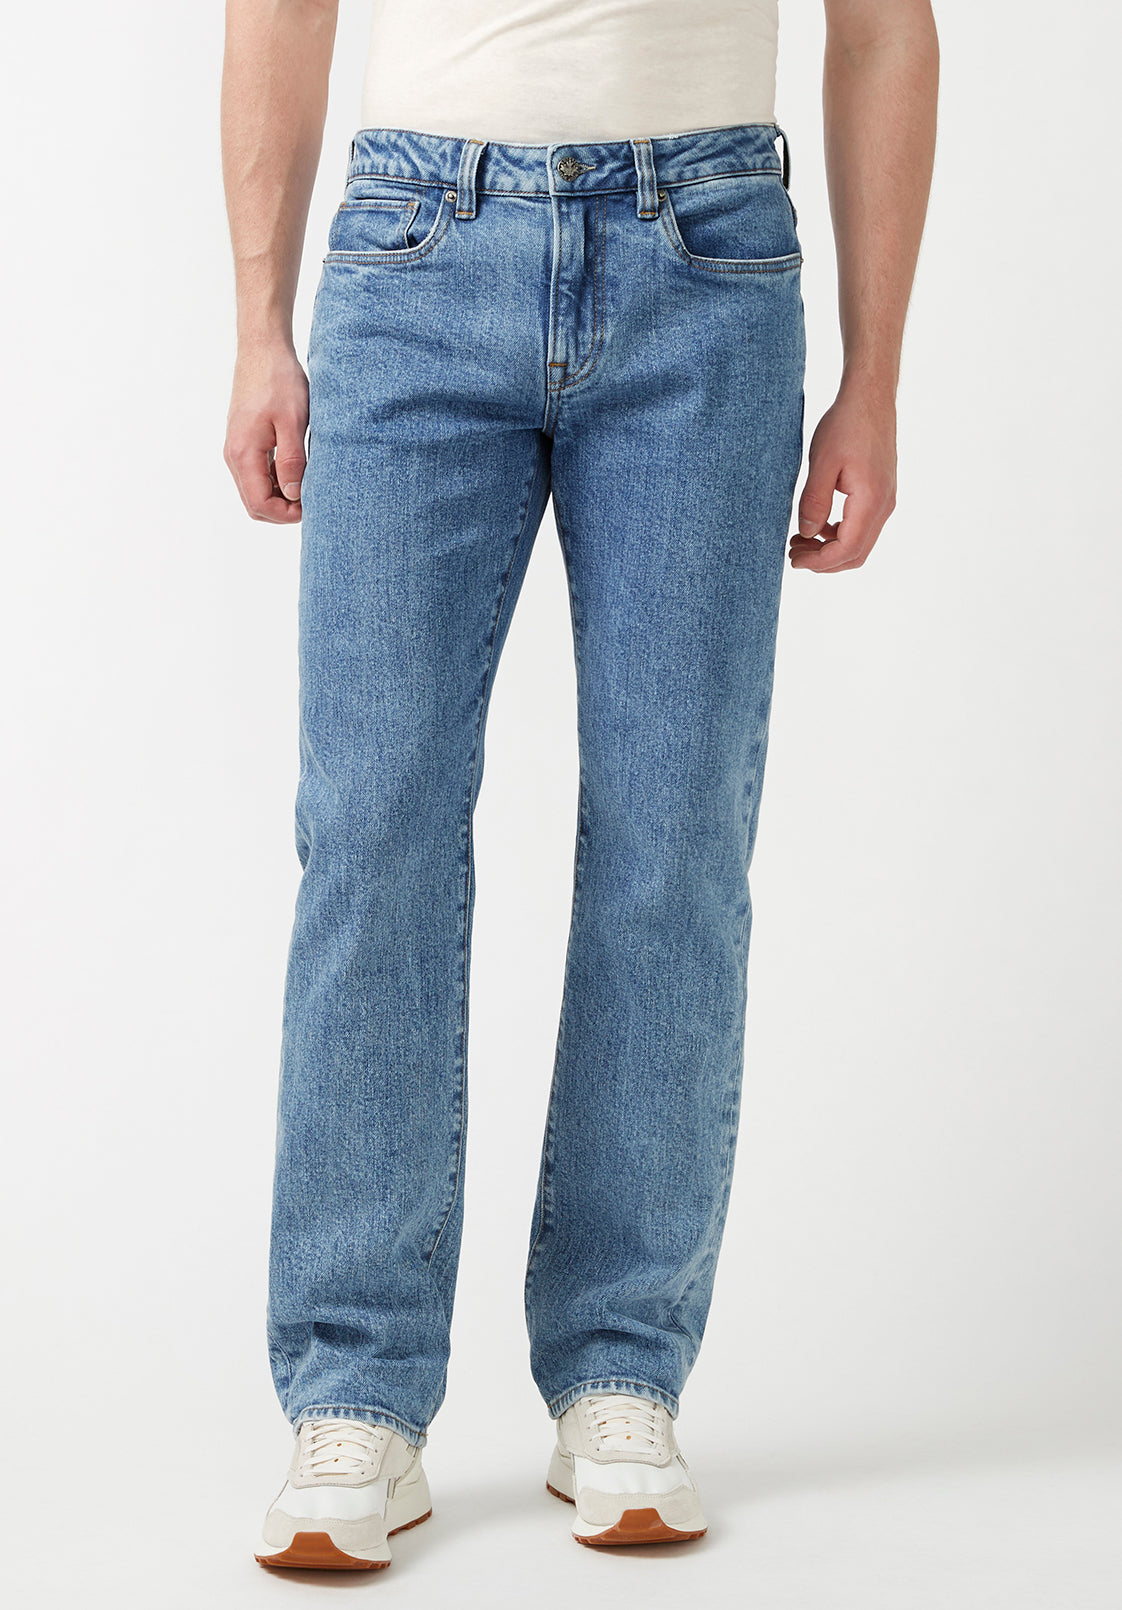 Men's Relaxed Fit Jeans | Men's Relaxed Straight Driven Jeans | Buffalo ...